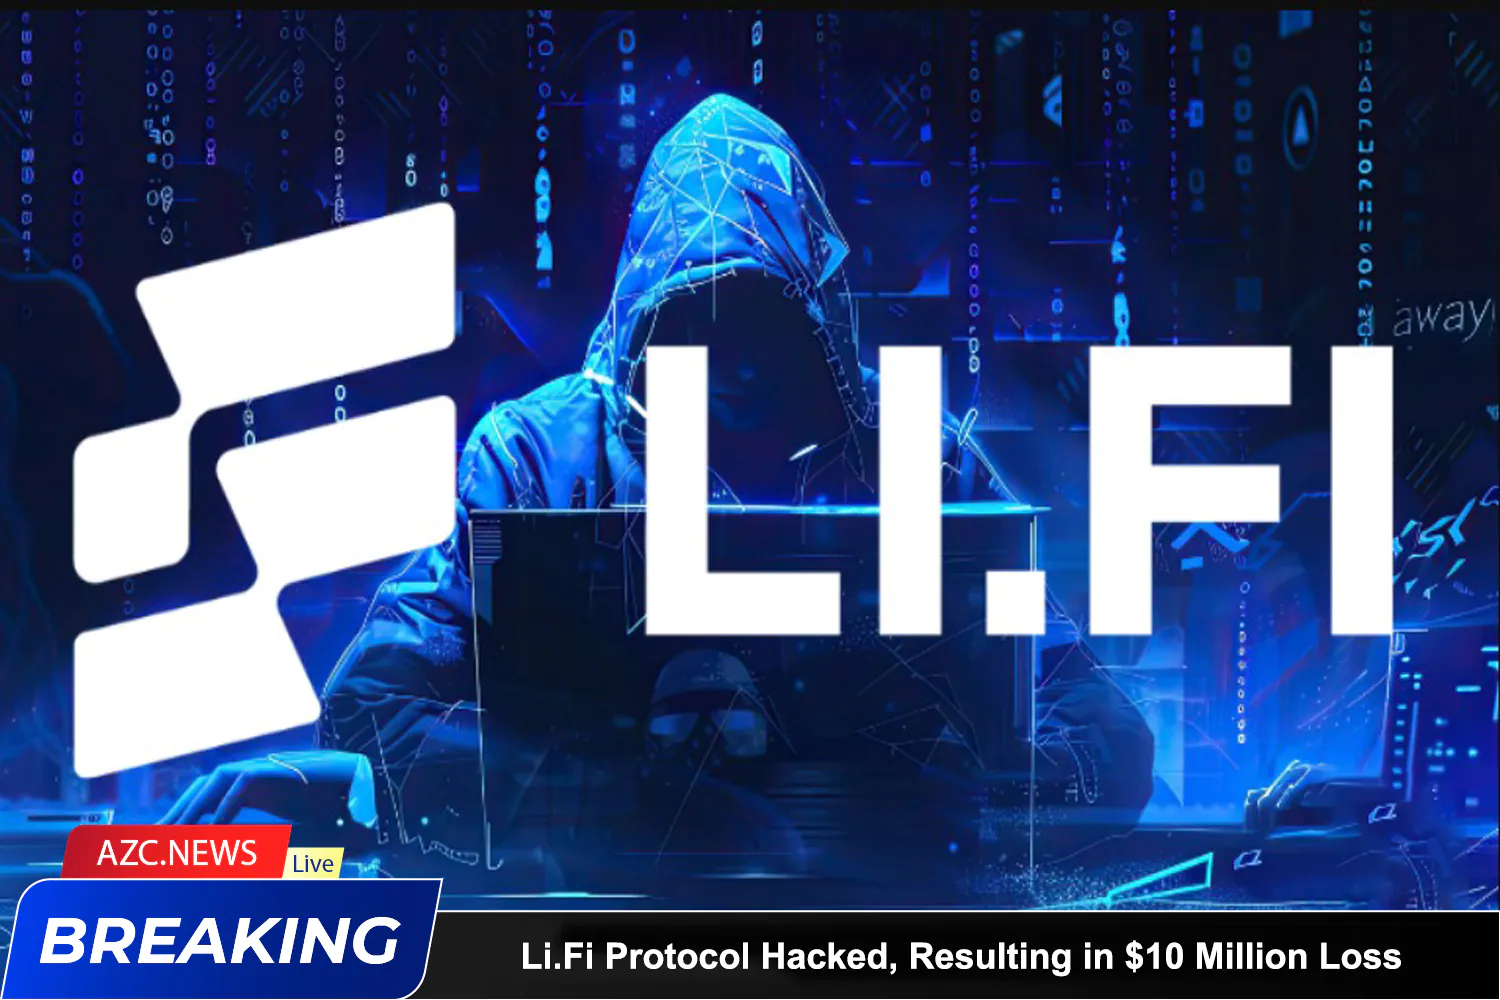 Azcnews Lifi Protocol Hacked, Resulting In $10 Million Loss